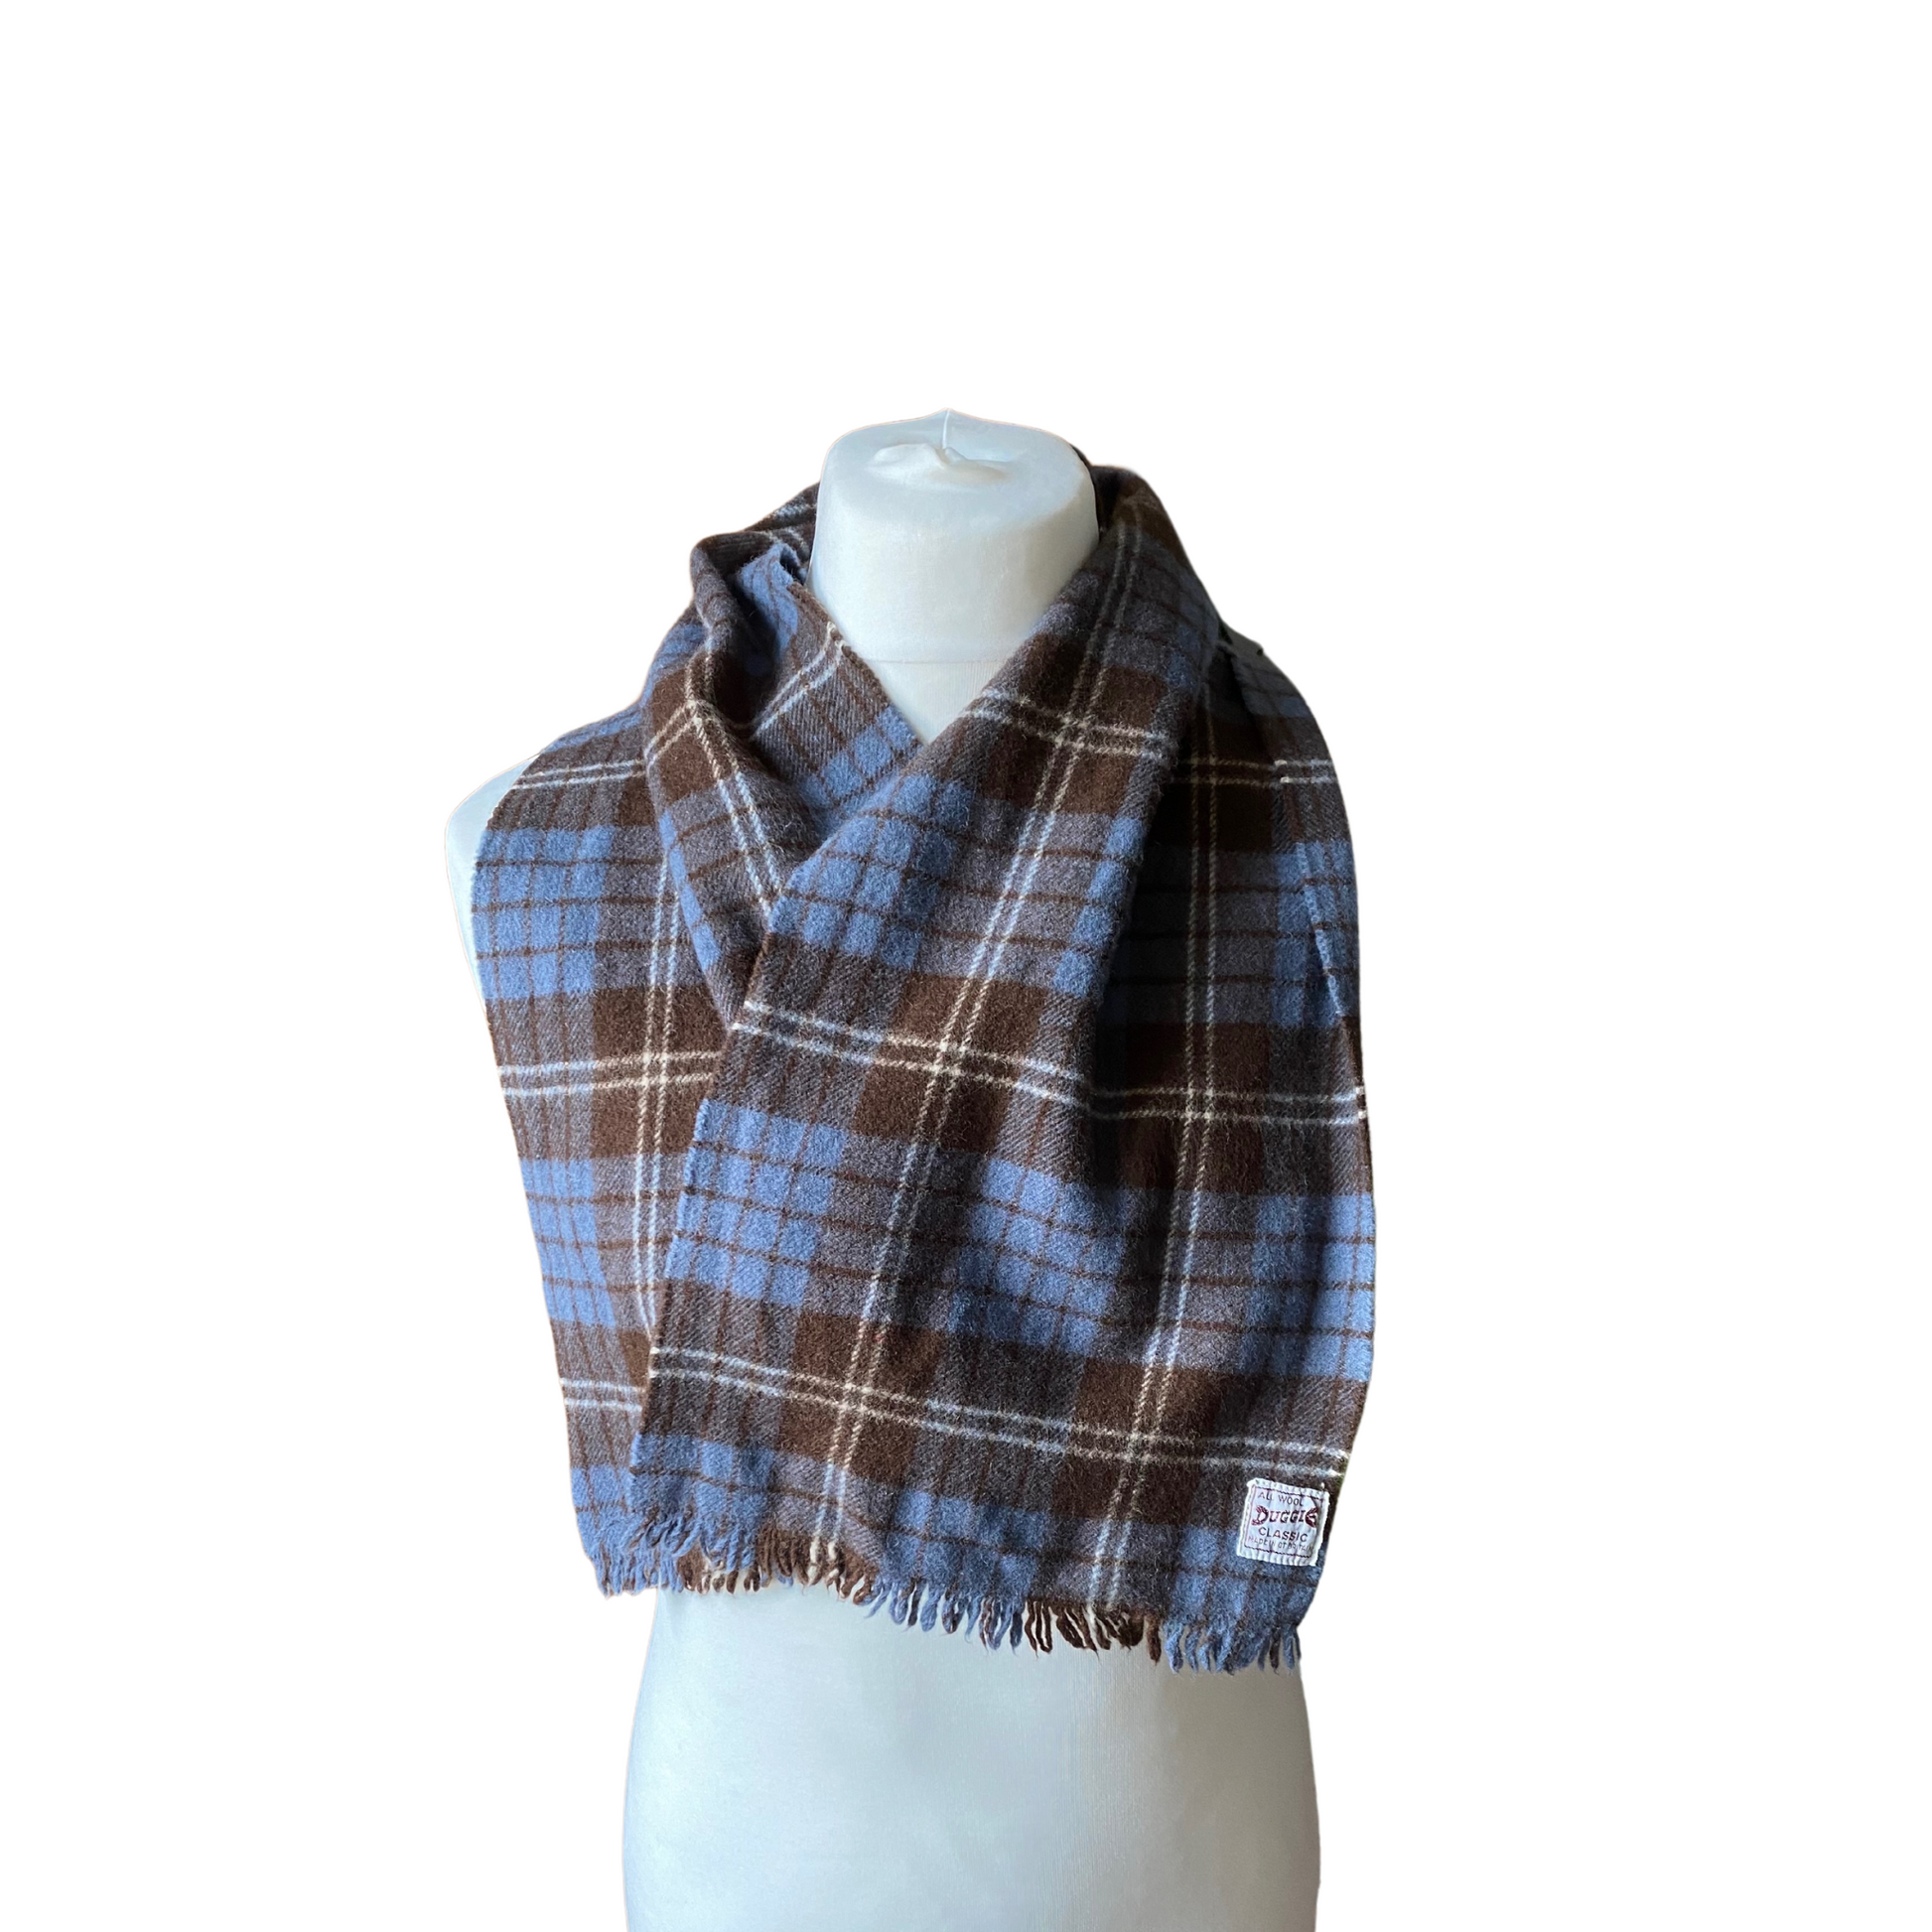 A stylish accessory for lovers of 60s mod fashion, featuring a classic tartan pattern with fringed edges.